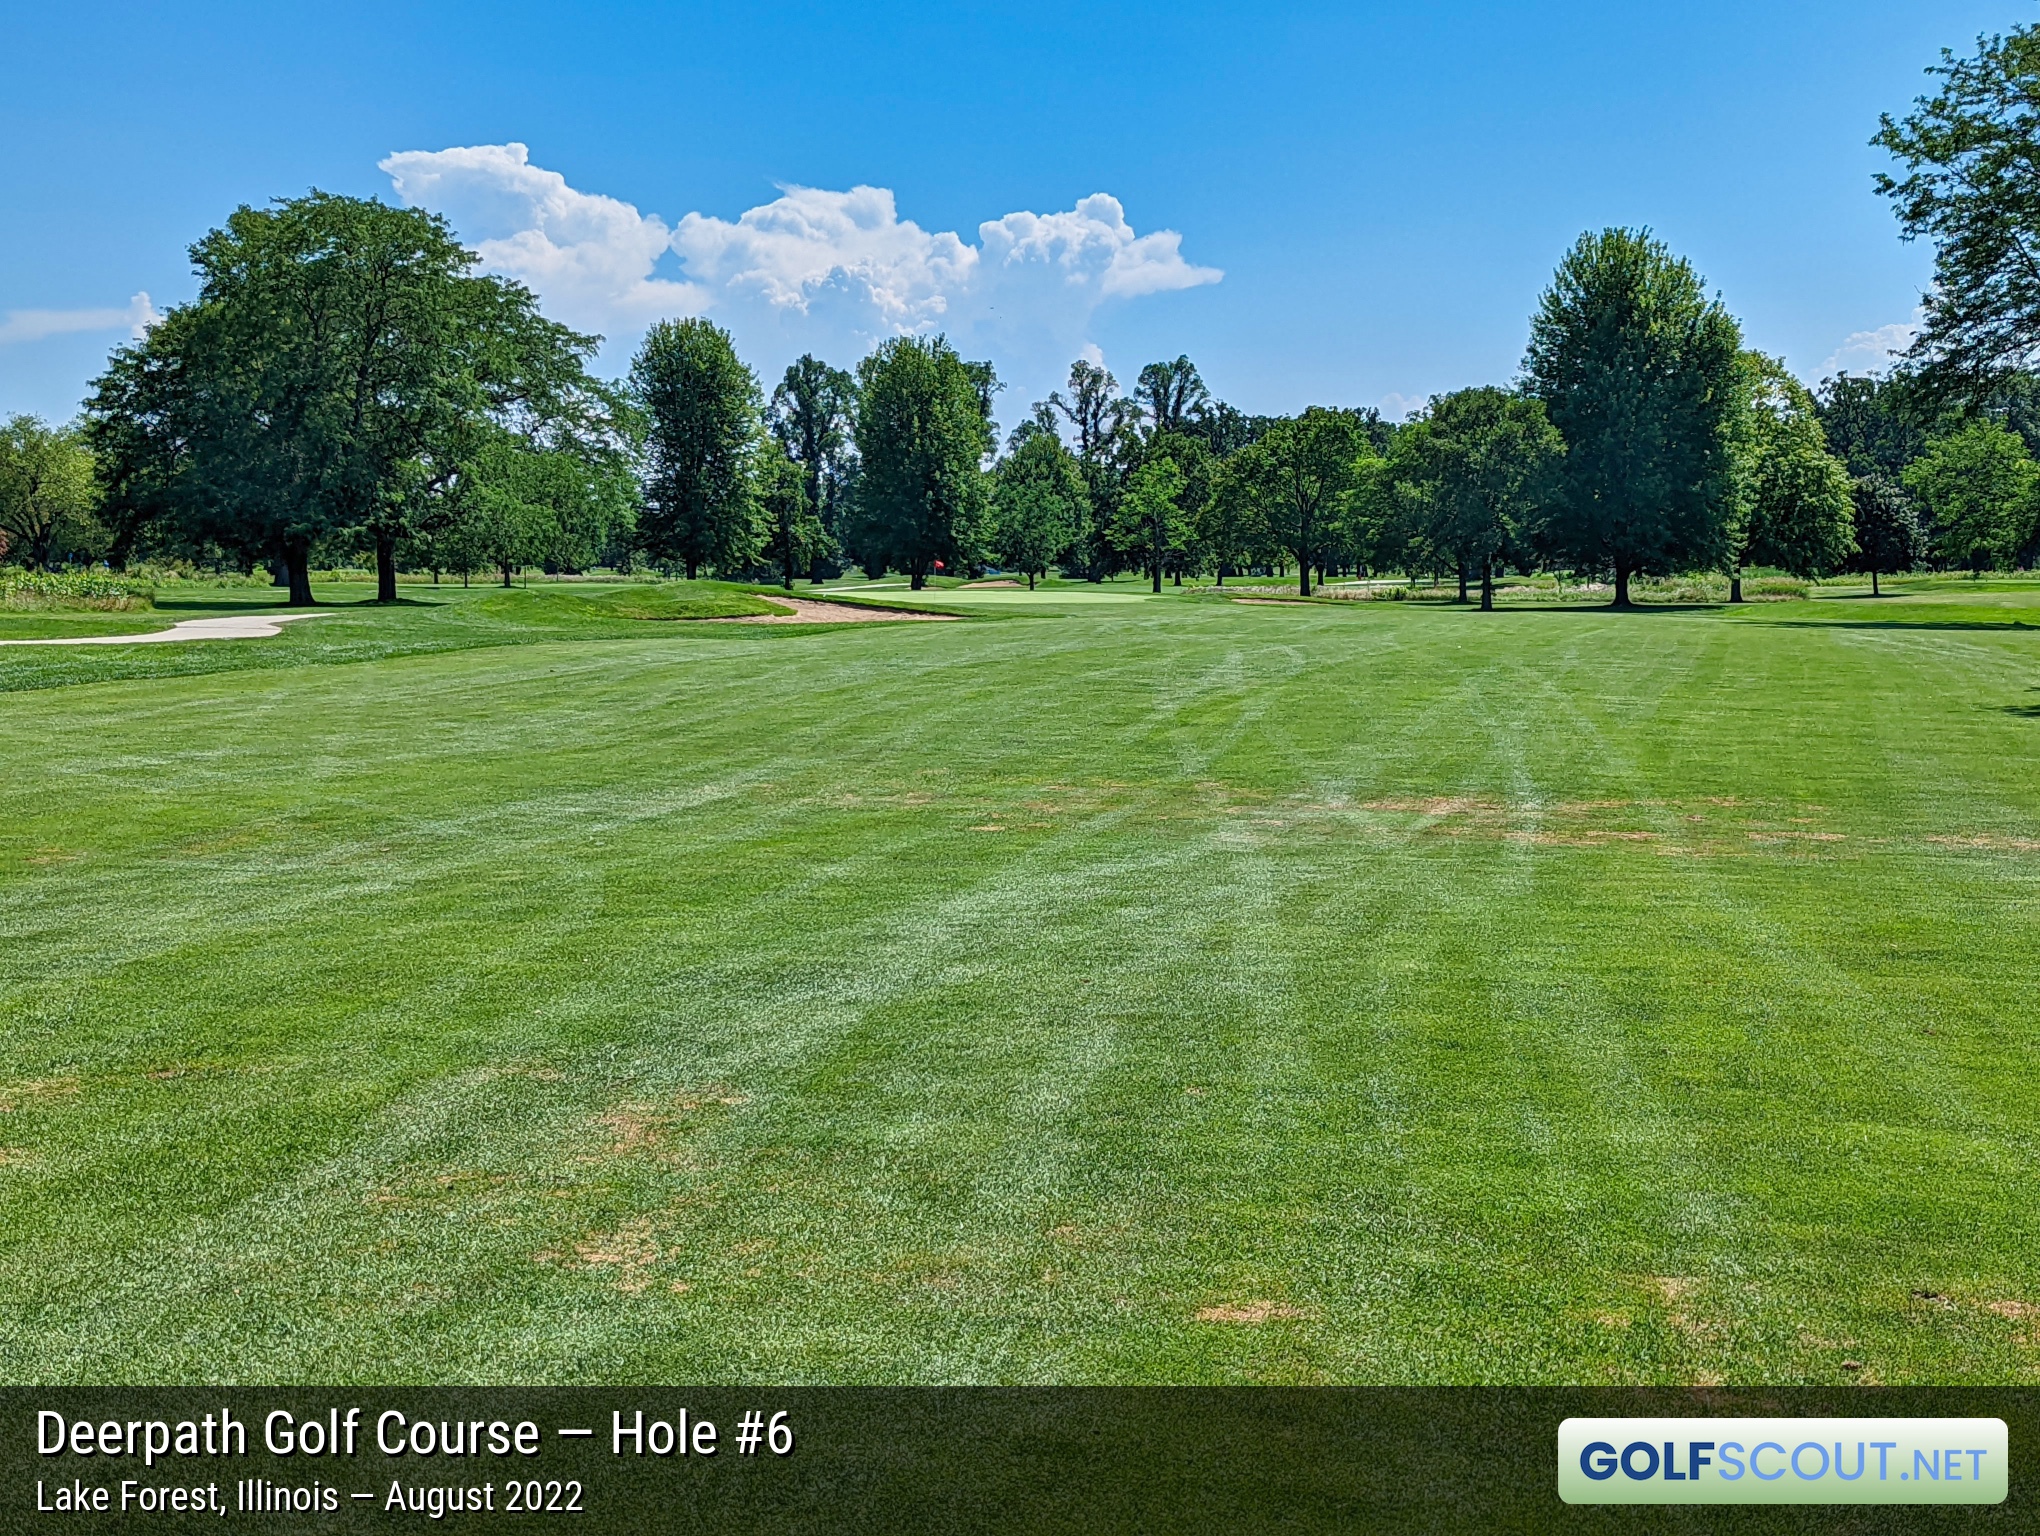 Photo of hole #6 at Deerpath Golf Course in Lake Forest, Illinois. 